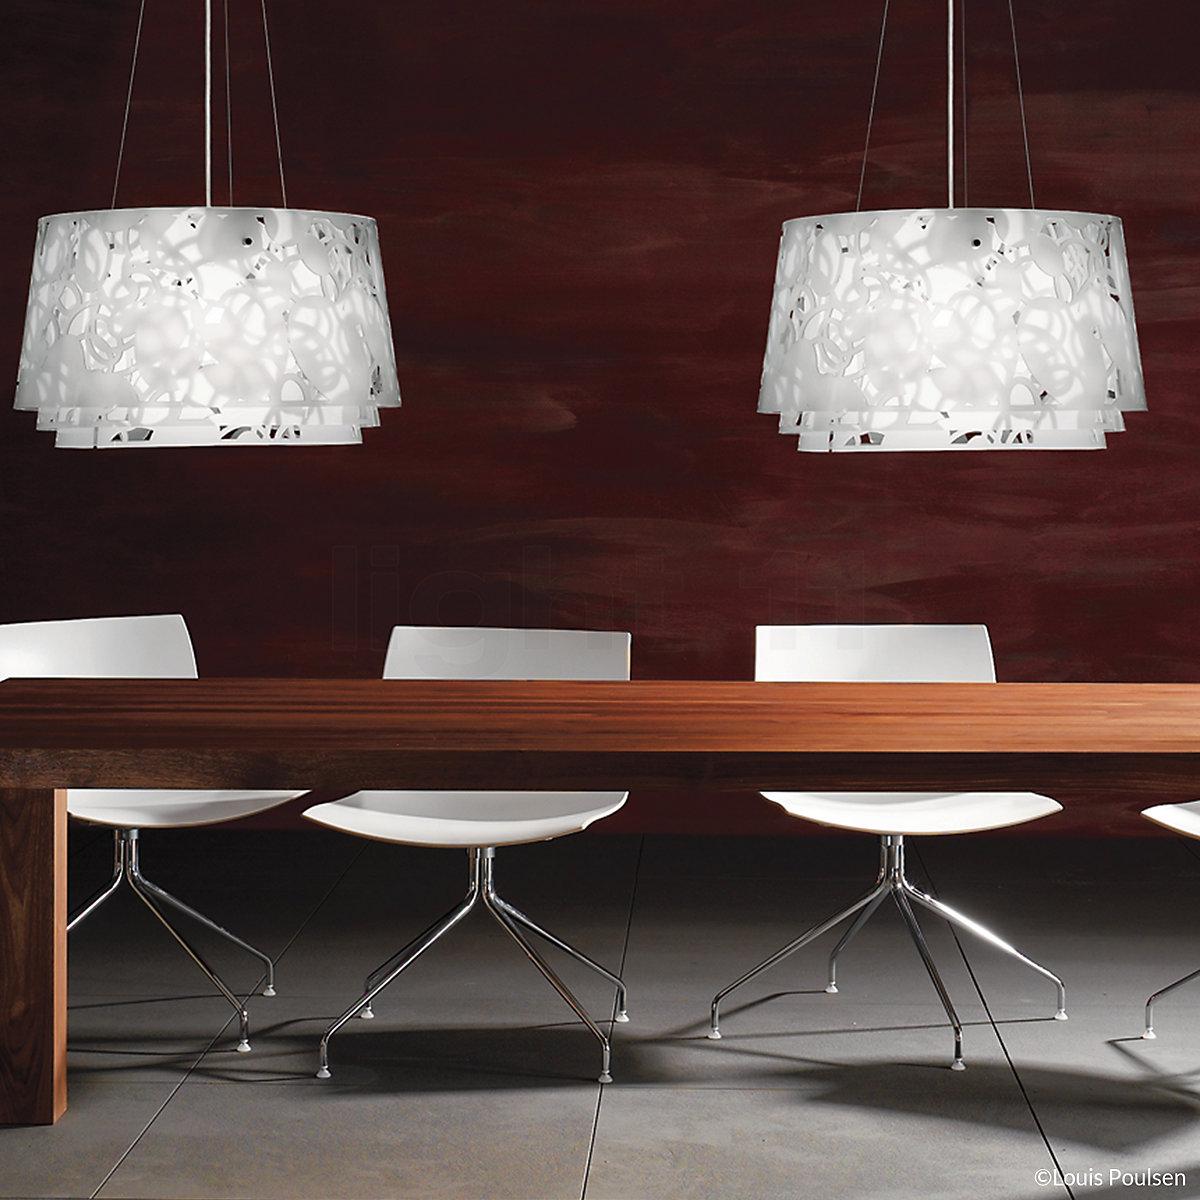 Louis Poulsen, large pendant by Louise Campbell.
Measures: Width x height x length (mm)
600 x 360 x 600, 4,8 kg
Material: Shades in laser-cut matt acrylic. Suspension in natural anodised aluminium. Canopy: Yes, cord length: 4 m, cord type: White